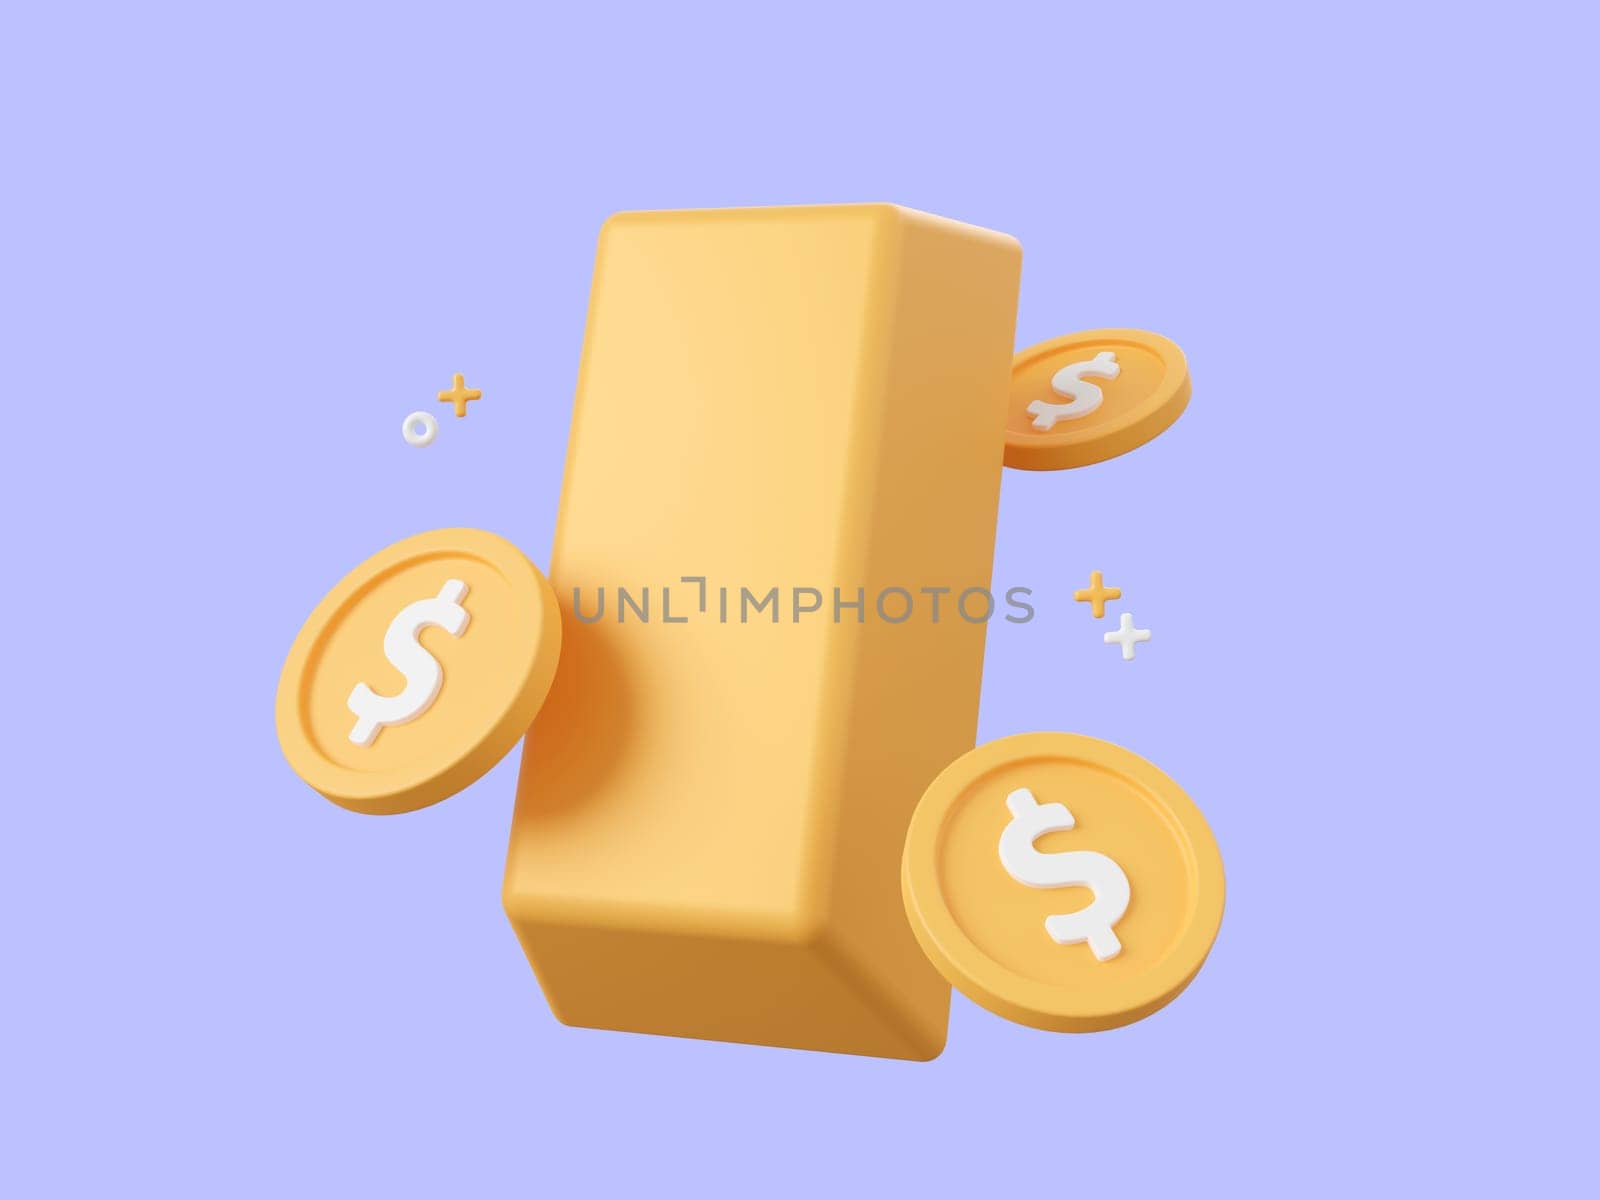 3d cartoon design illustration of Gold bar and coin icon isolated, Investment and money savings concept.